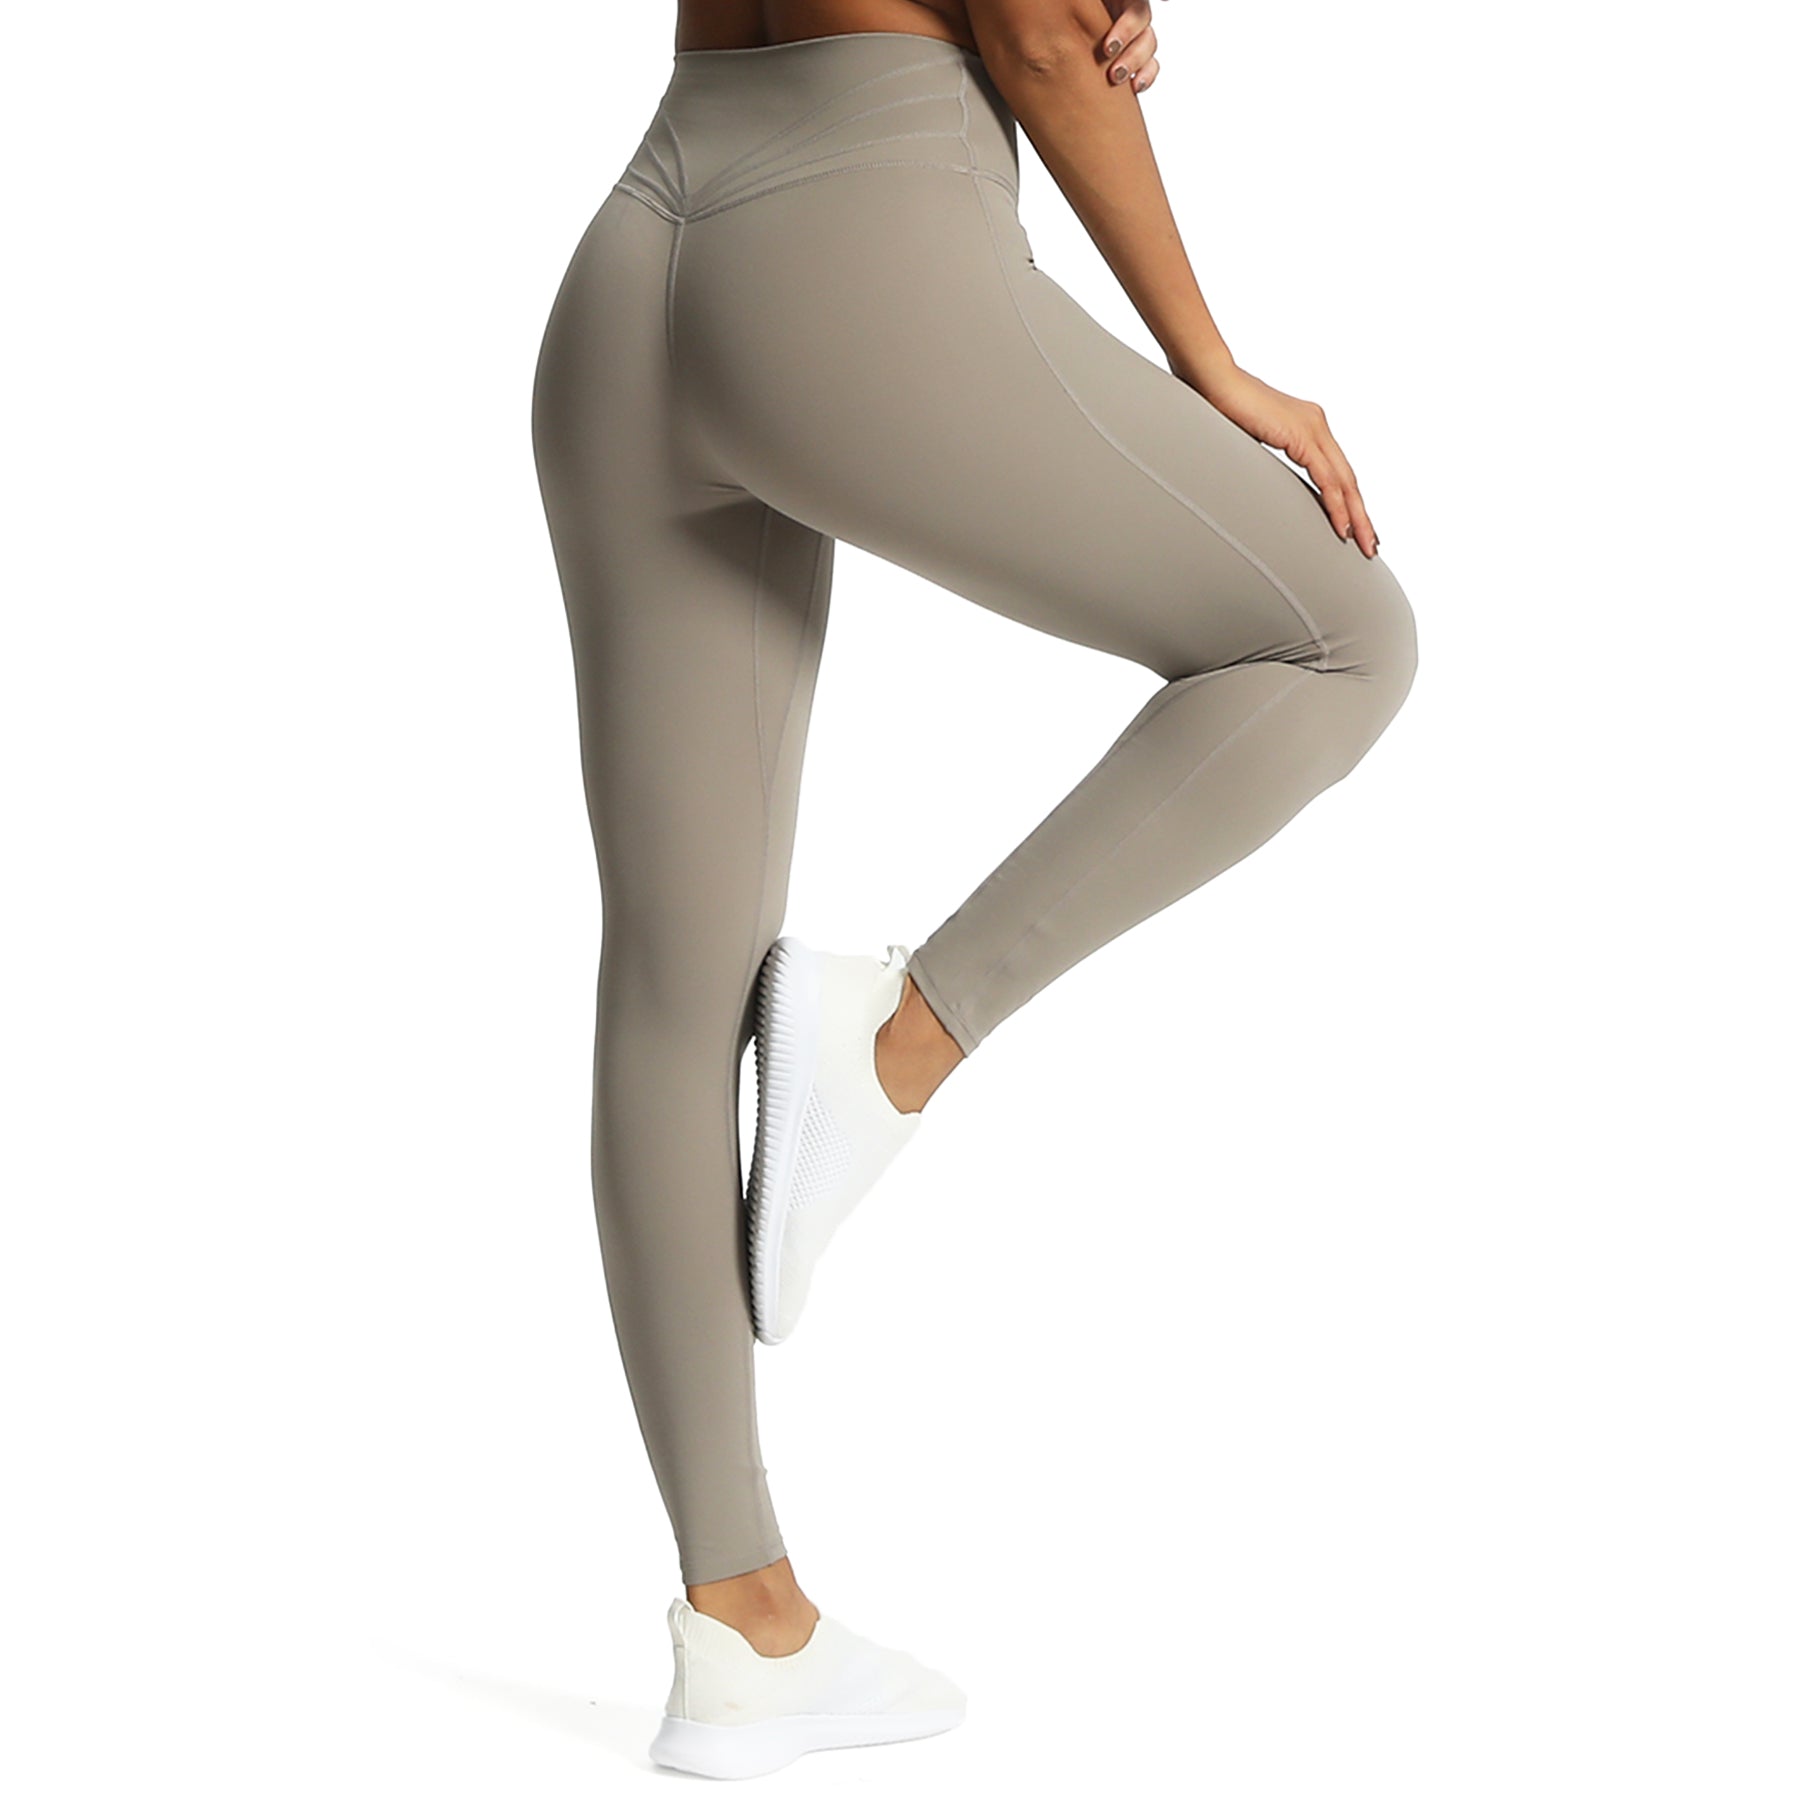  Aoxjox High Waisted Workout Leggings For Women Compression  Tummy Control Trinity Buttery Soft Yoga Pants 26